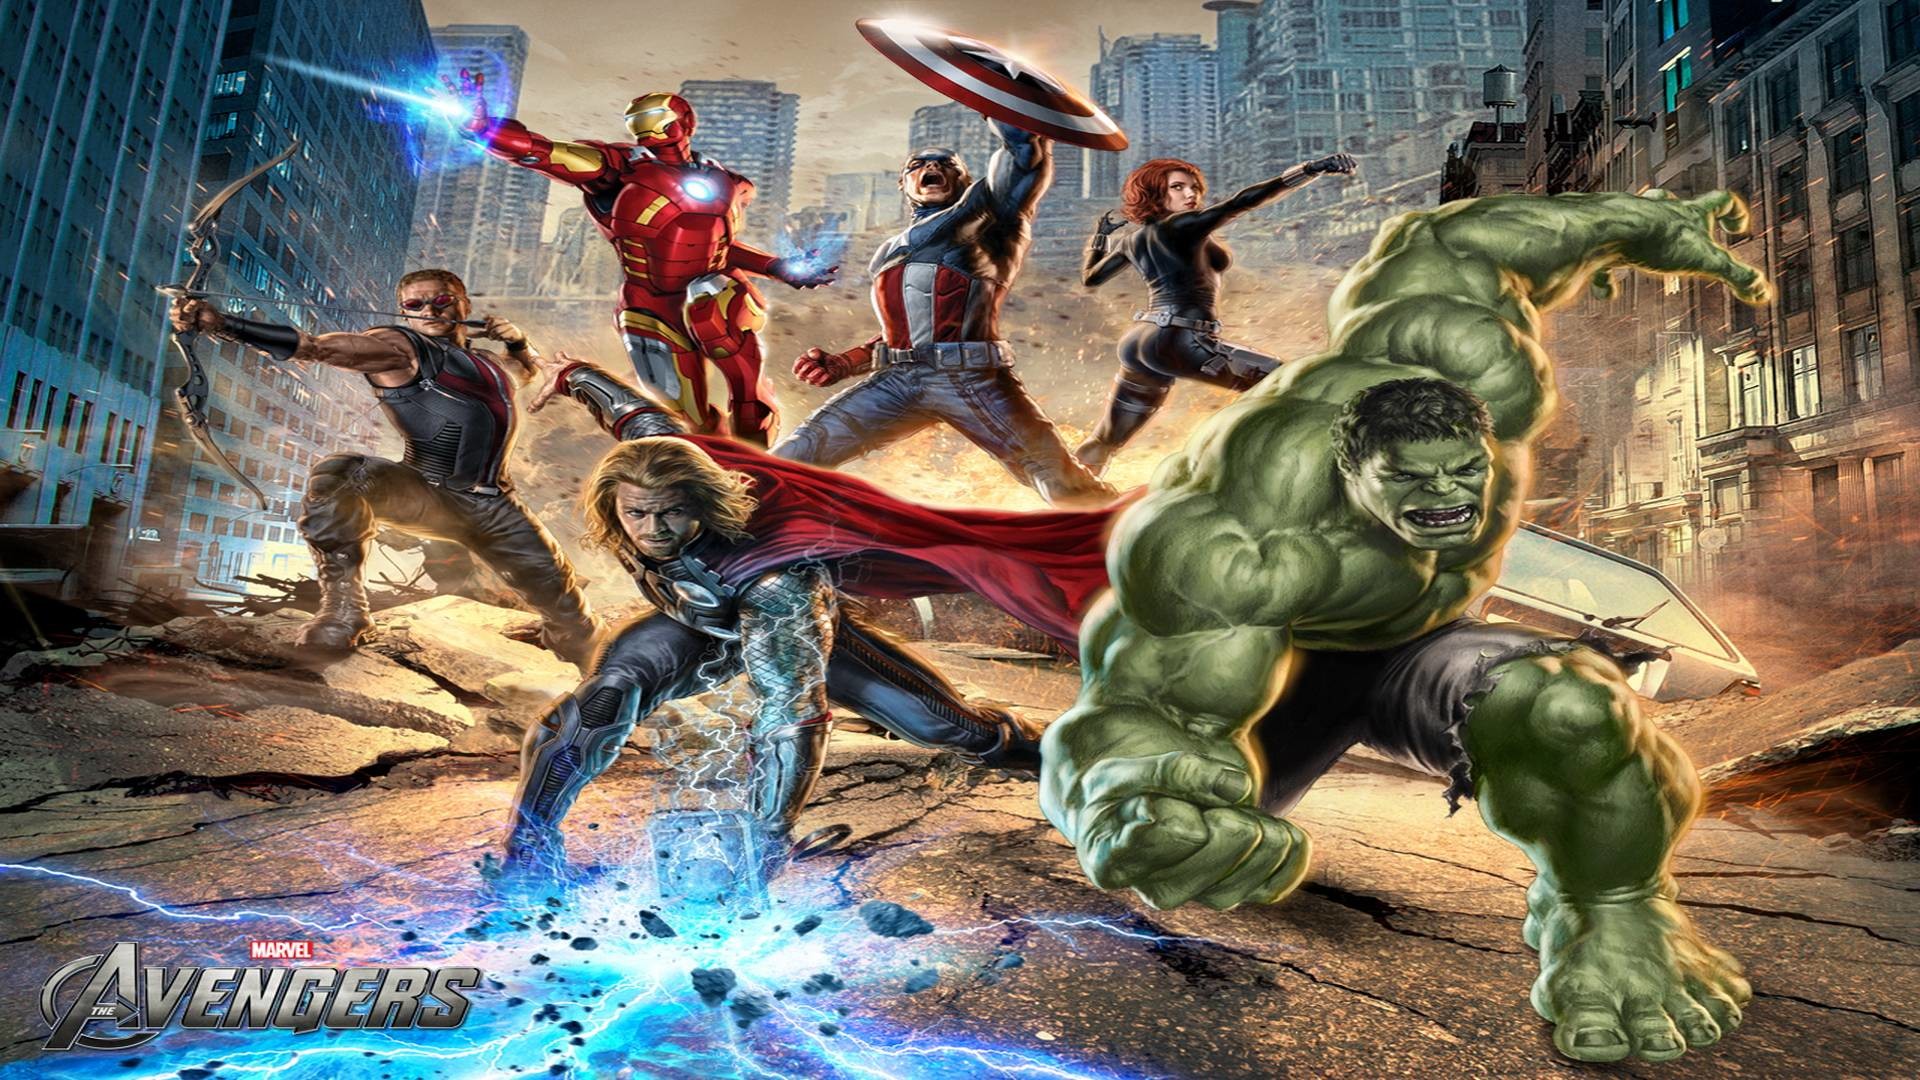 1920x1080 The Avengers Wallpapers For Desktop  Movie Backgrounds